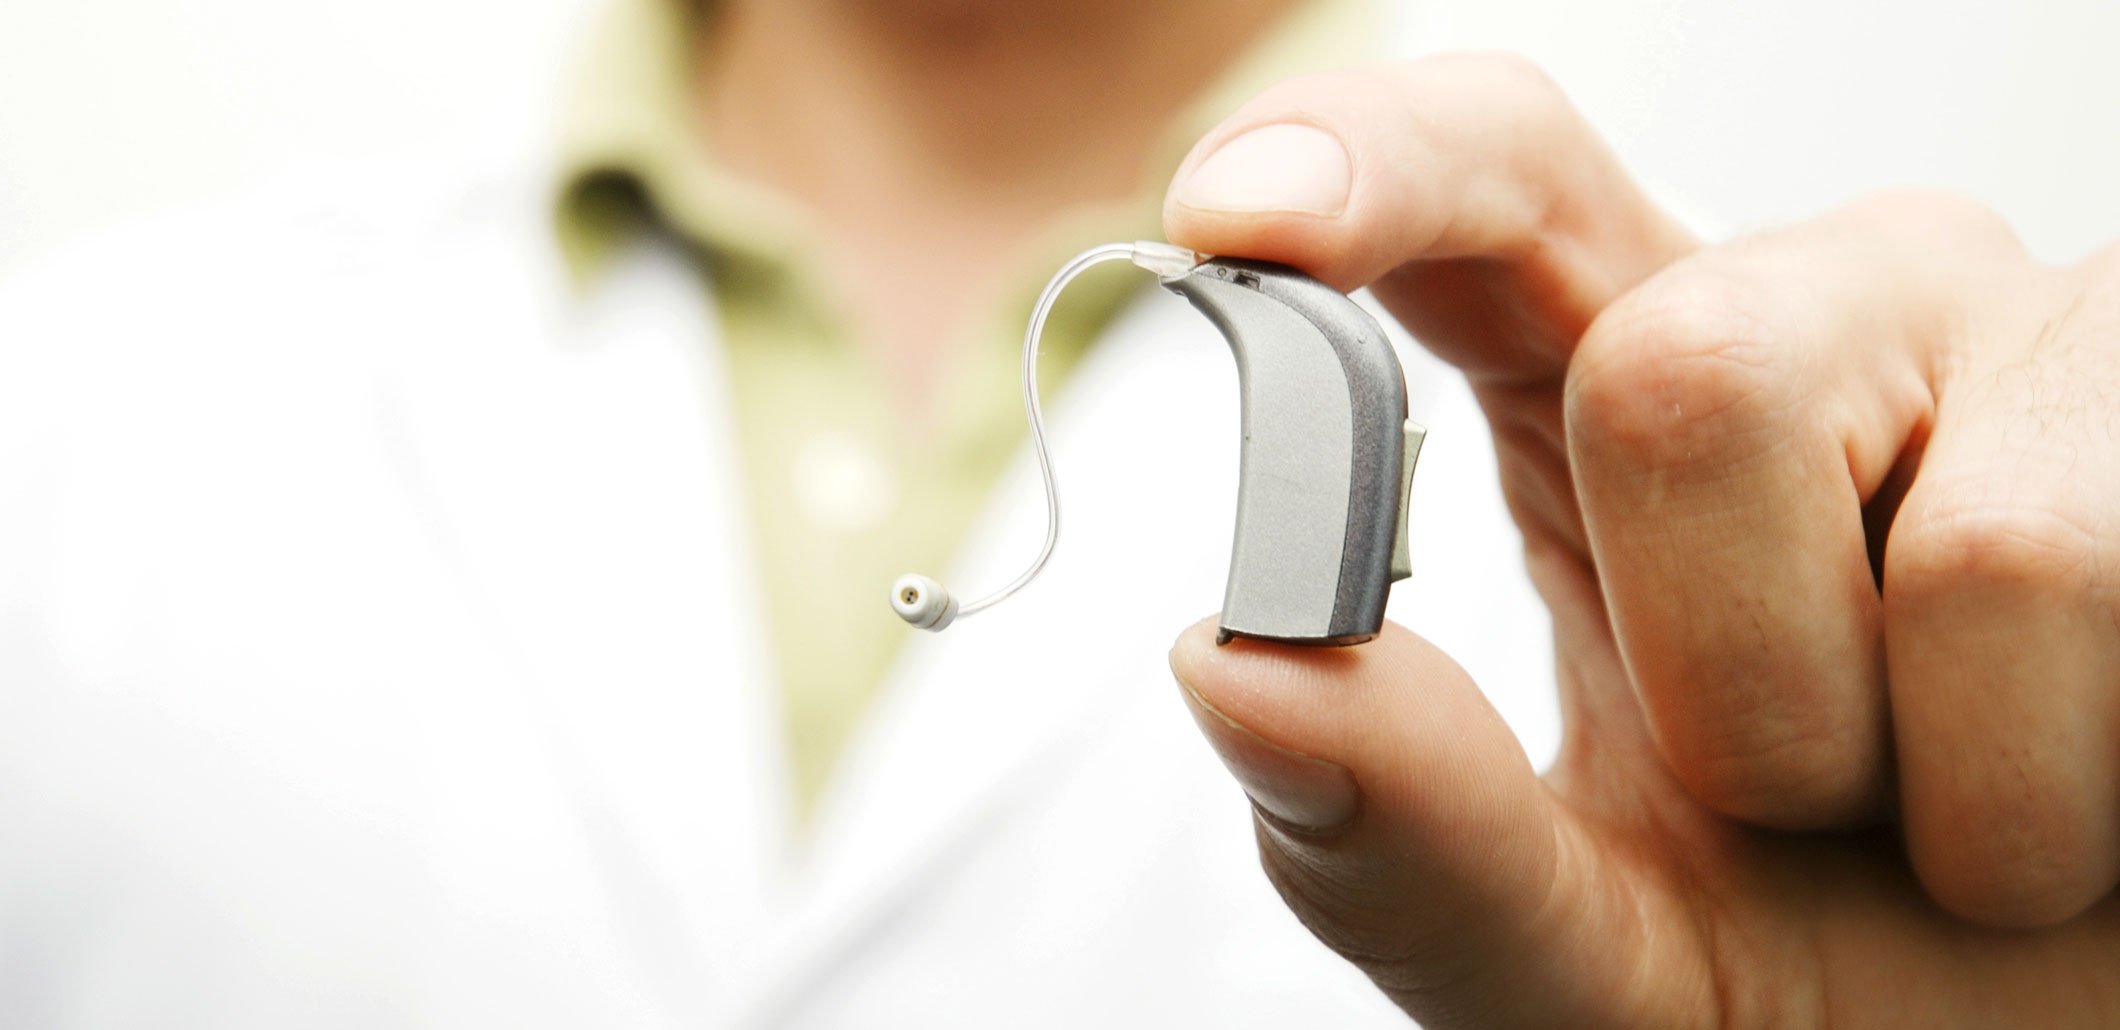 What Is the Best Hearing Aid on the Market?